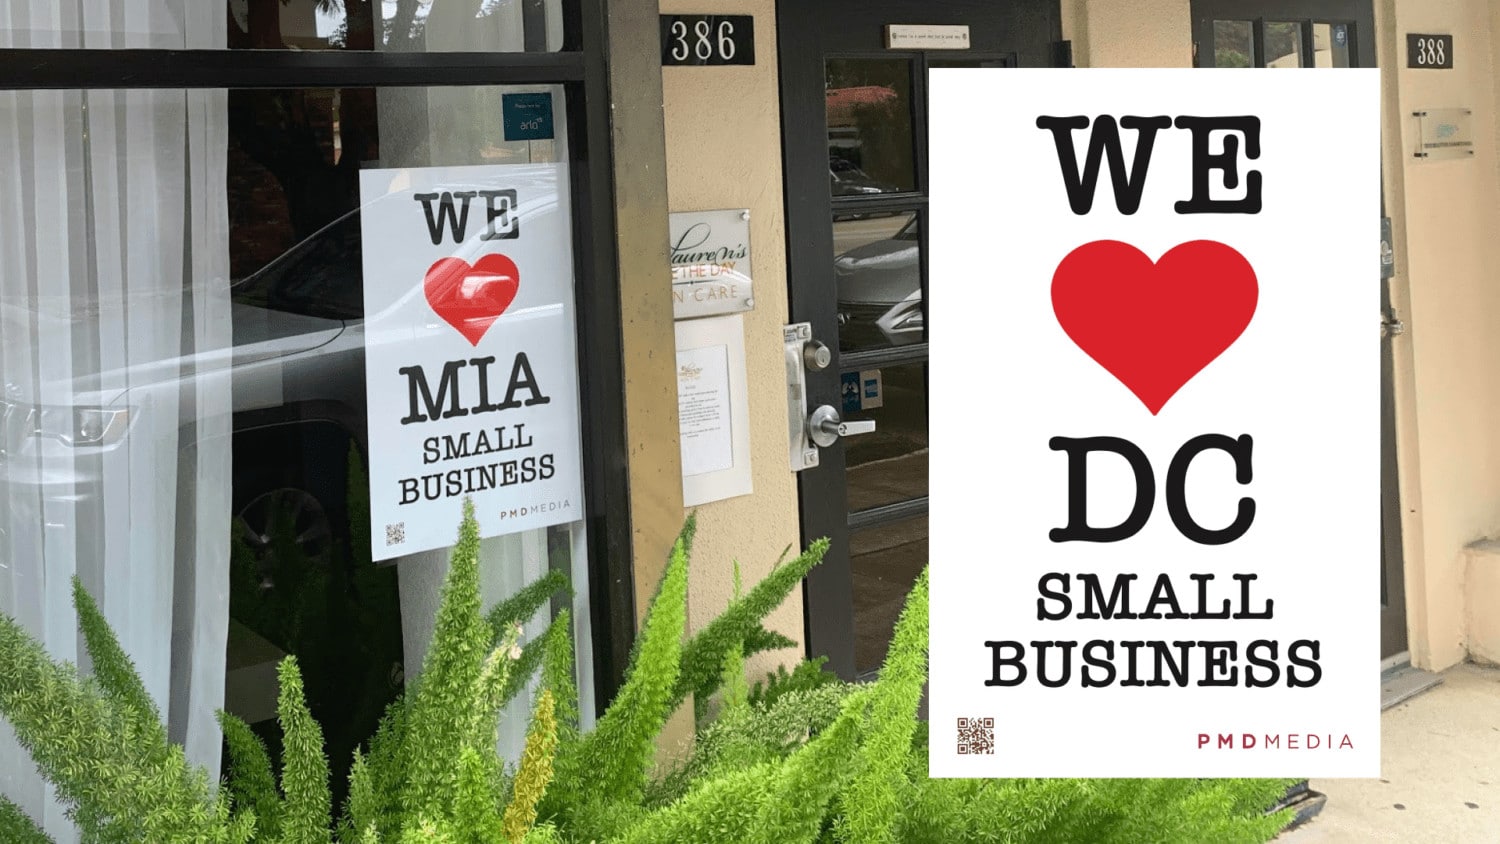 We love small business